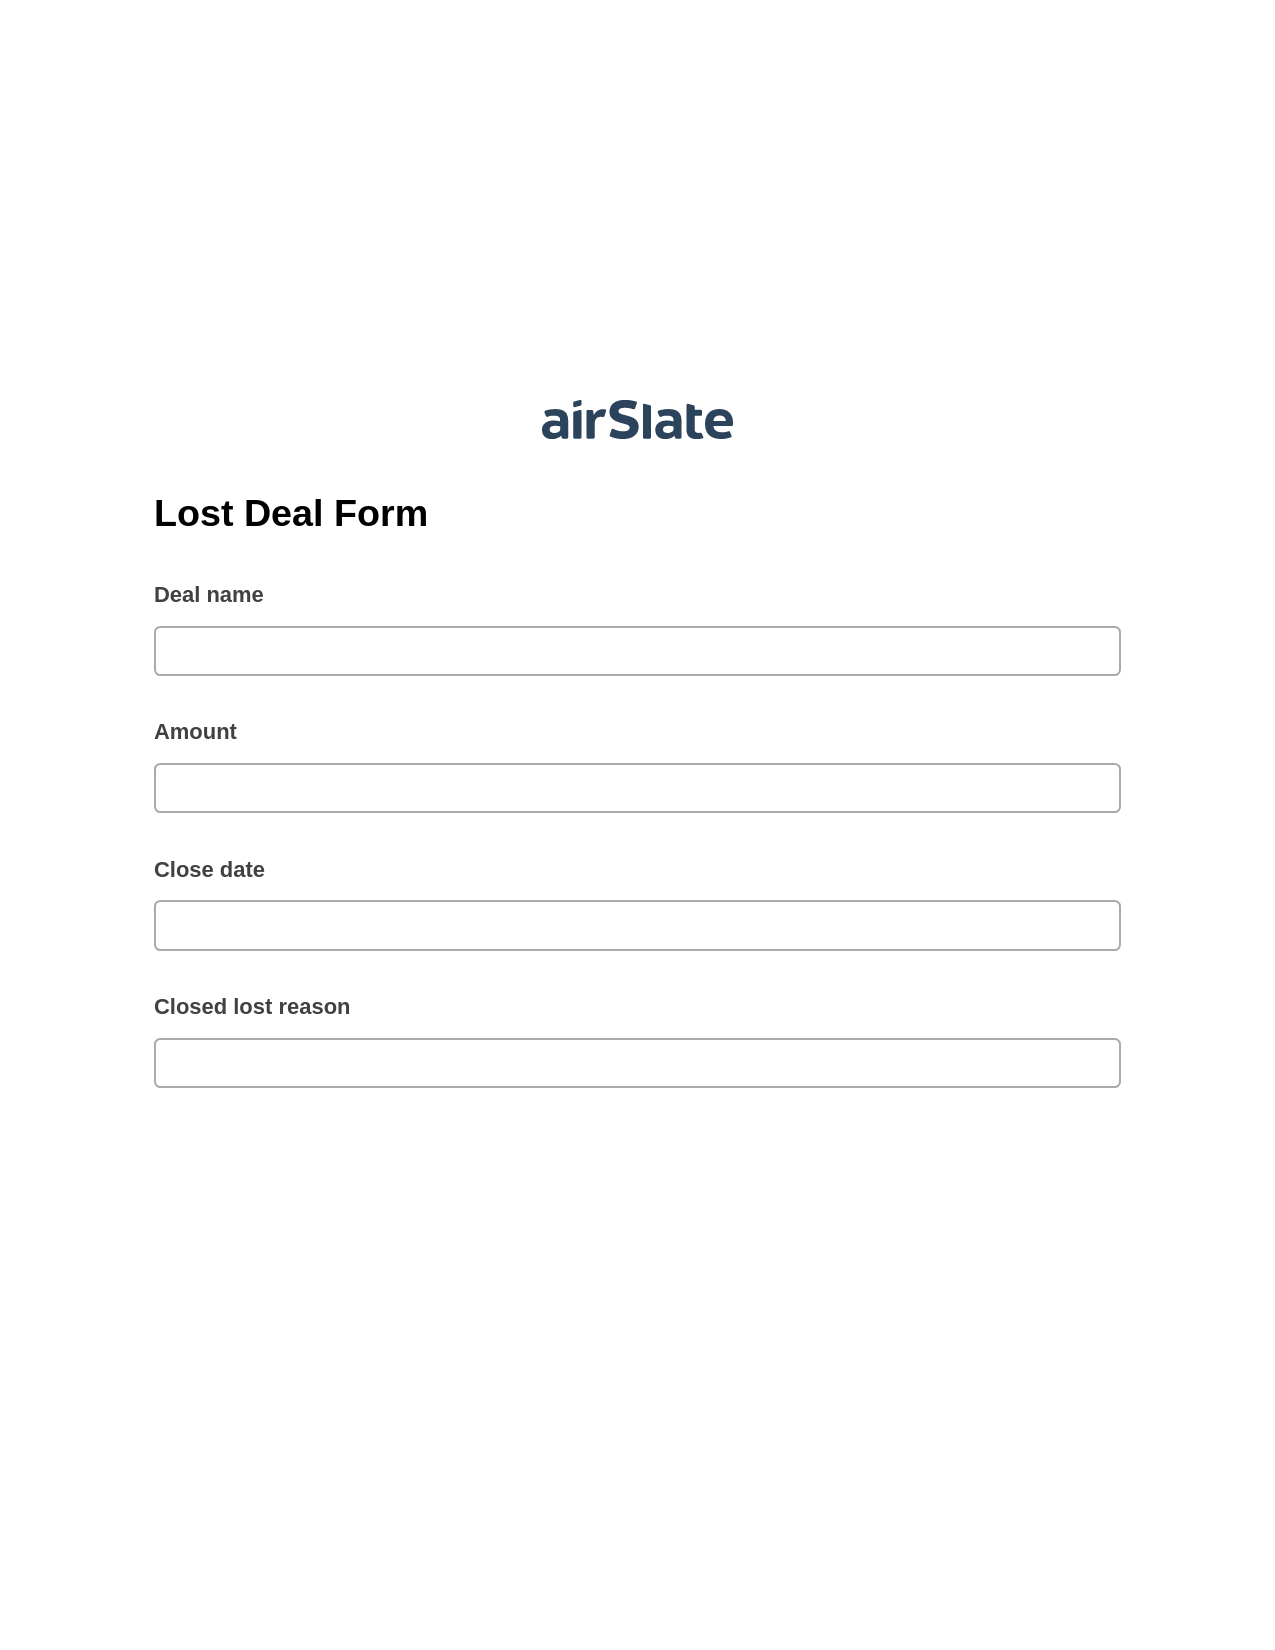 Lost Deal Form Pre-fill from Salesforce Records Bot, Webhook Bot, Archive to SharePoint Folder Bot